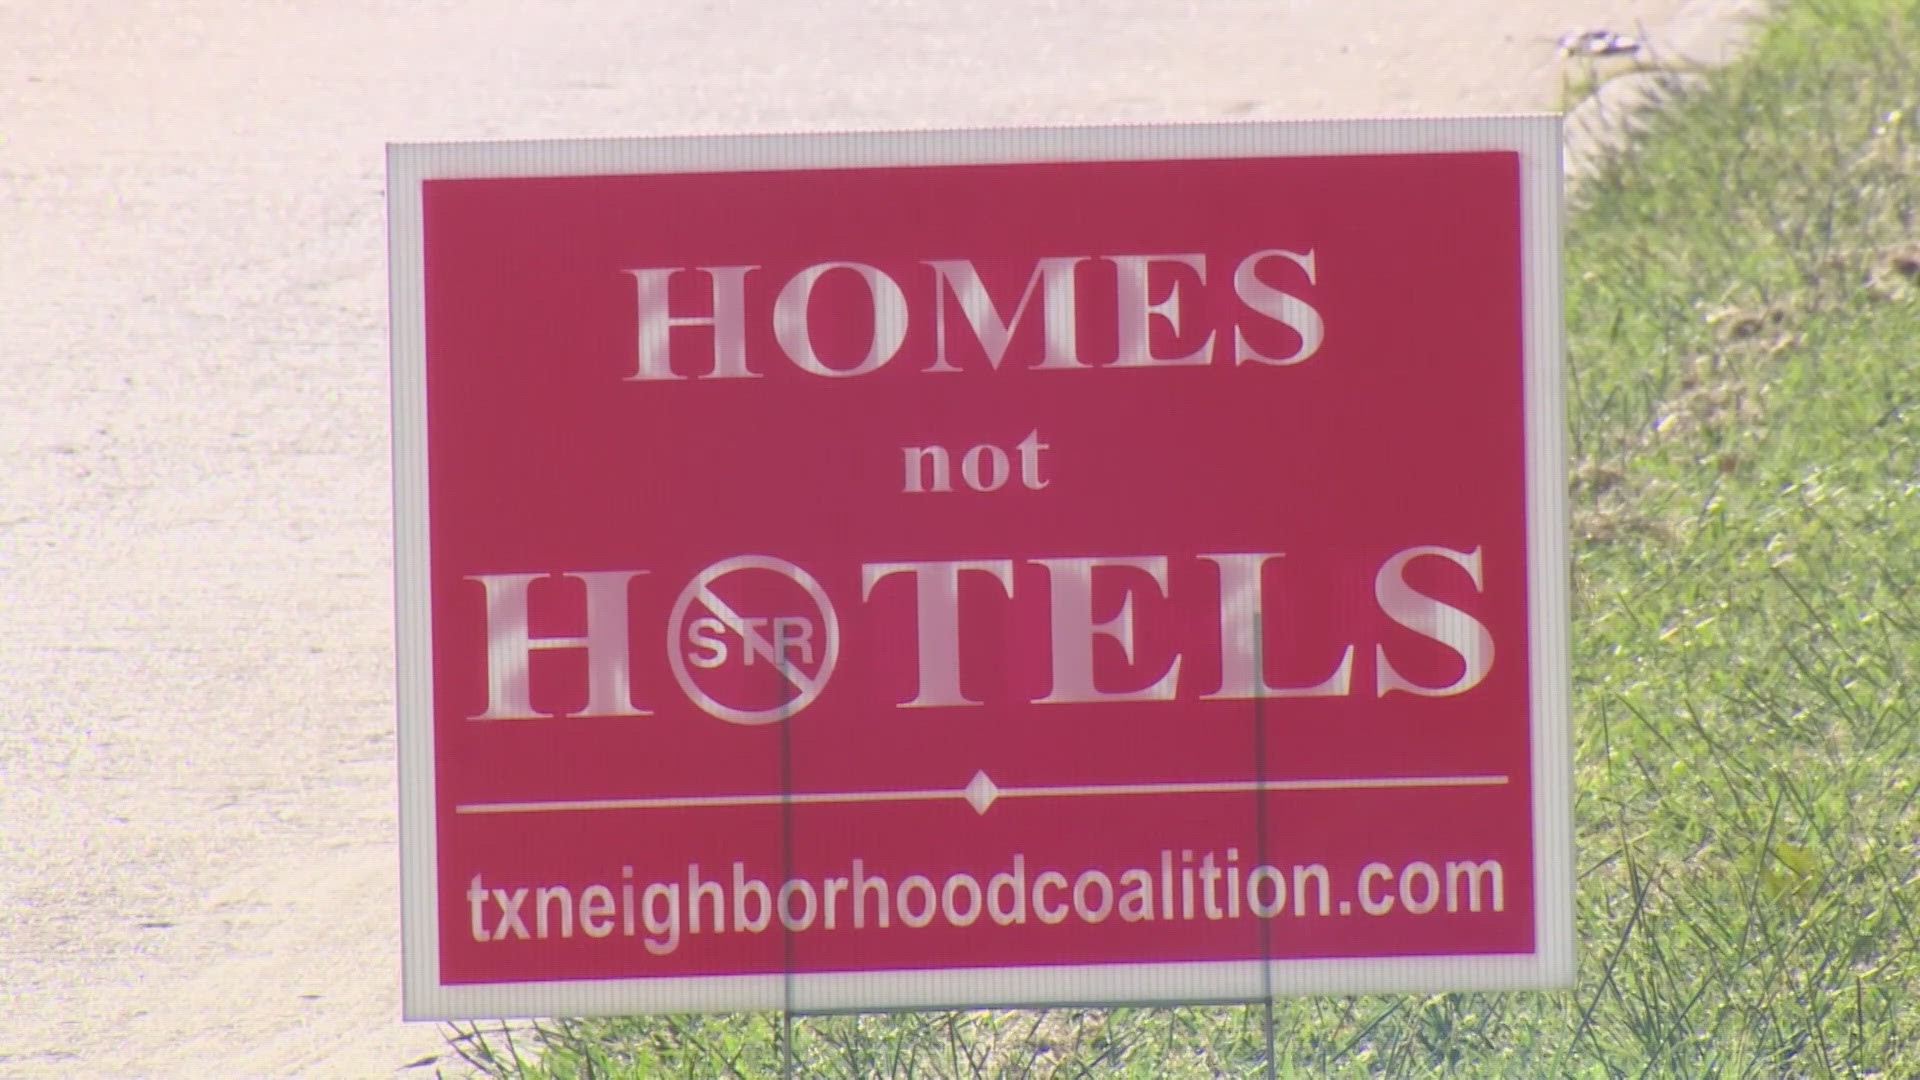 Neighbors complained that short term rentals create issues with noise, parking and safety. The vote is the culmination of two years of debate.